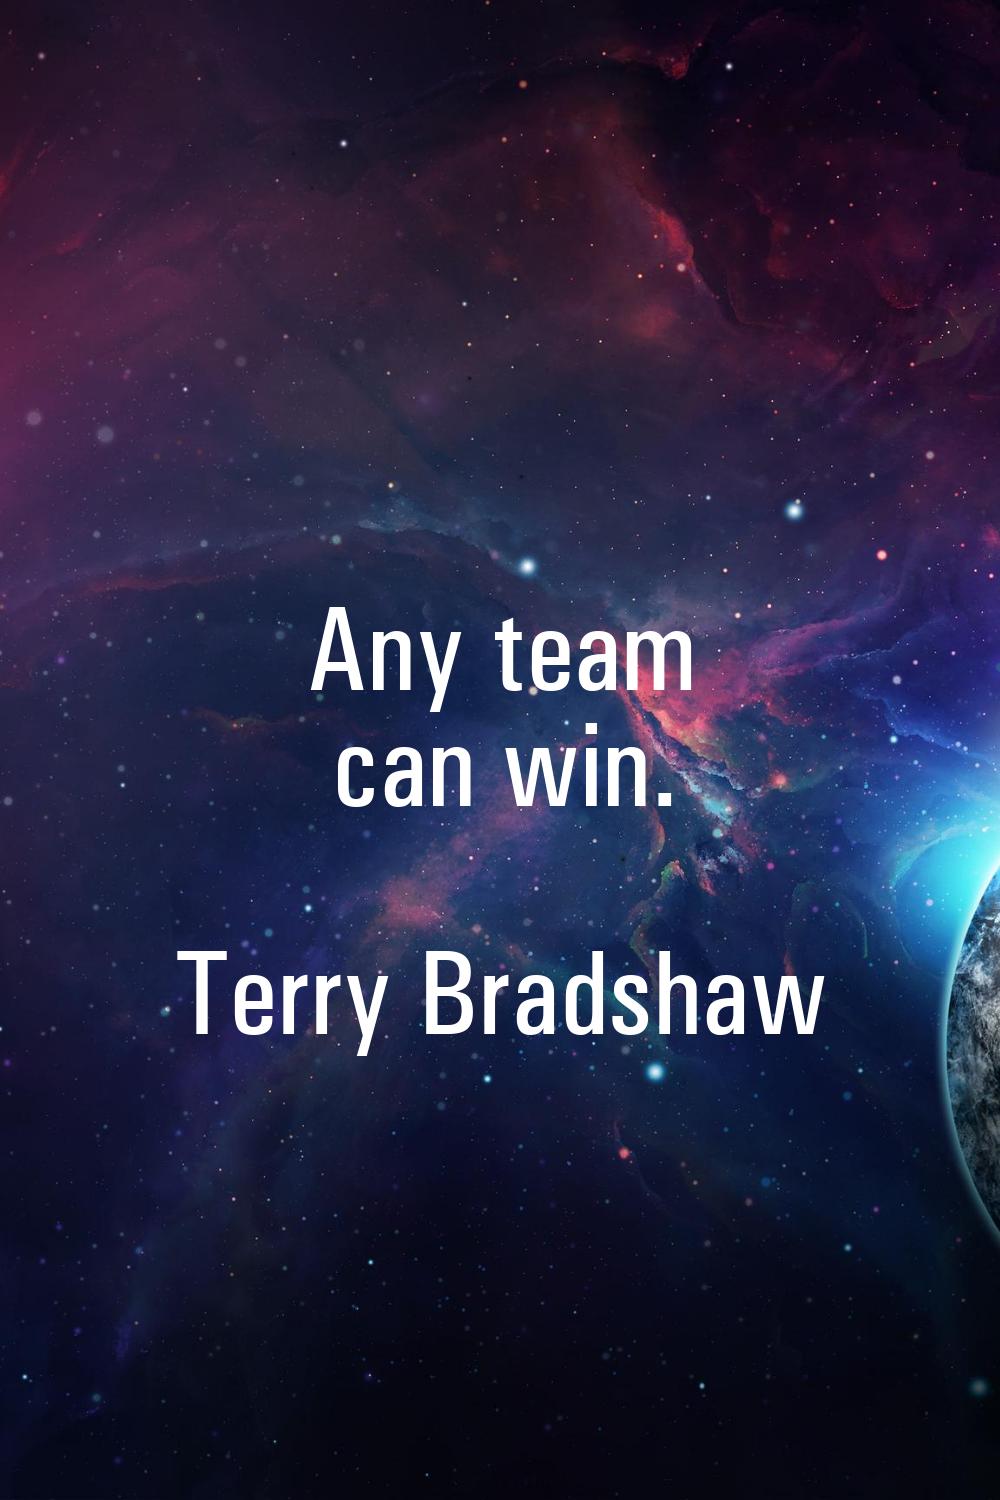 Any team can win.